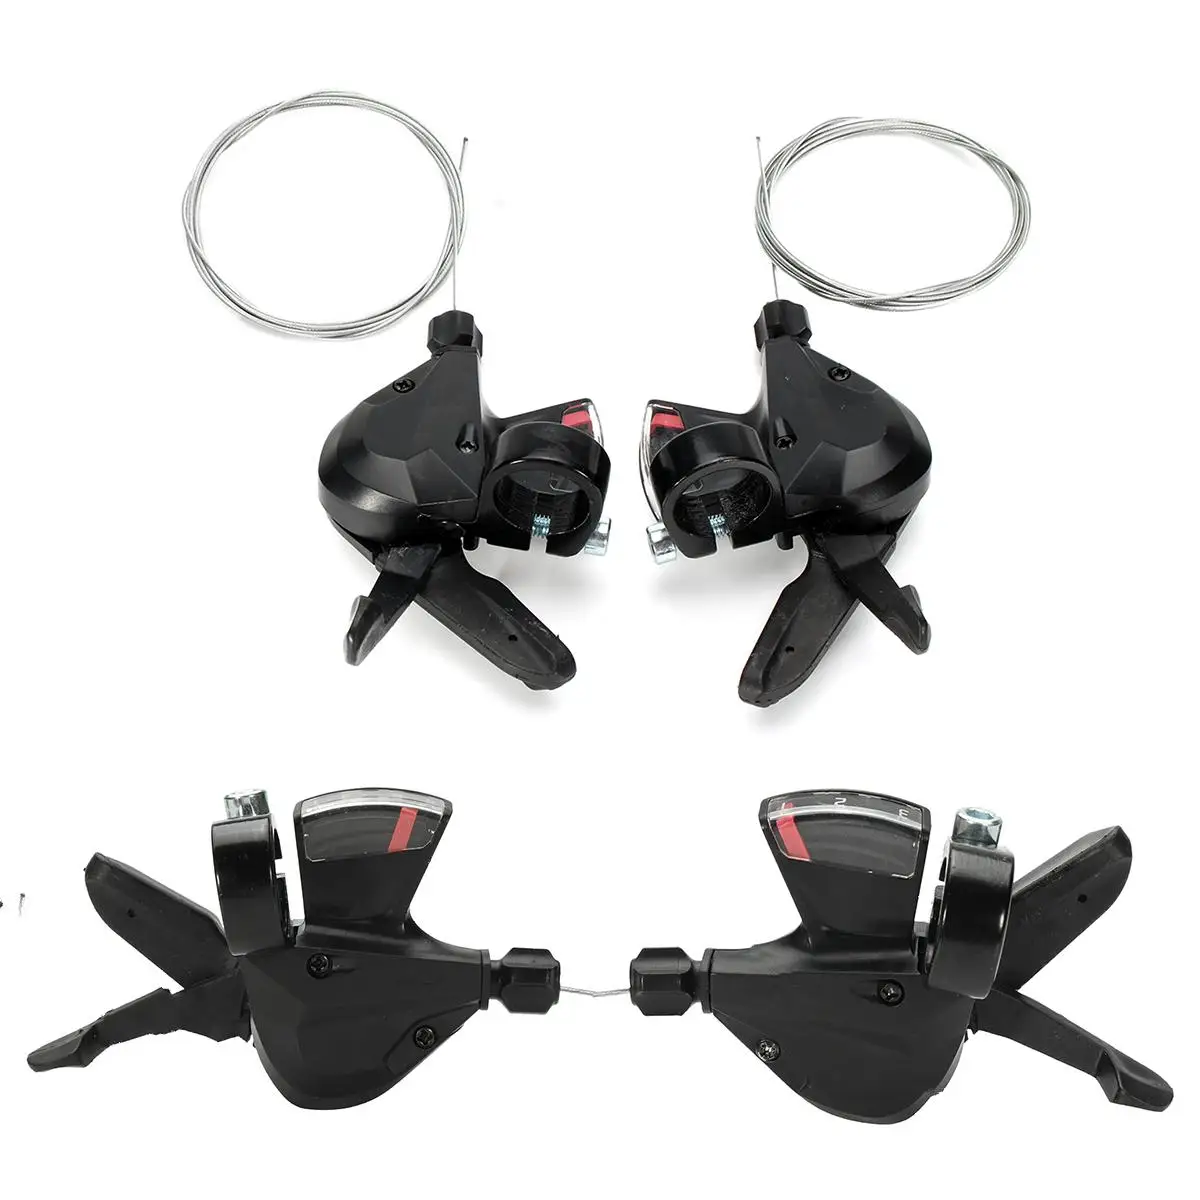 HOT 1 Pair 3x8 Speed MTB Bike Bicycle Left Right Shifter for Shimano Acera SL-M310 Bicycle Derailleur Groupset